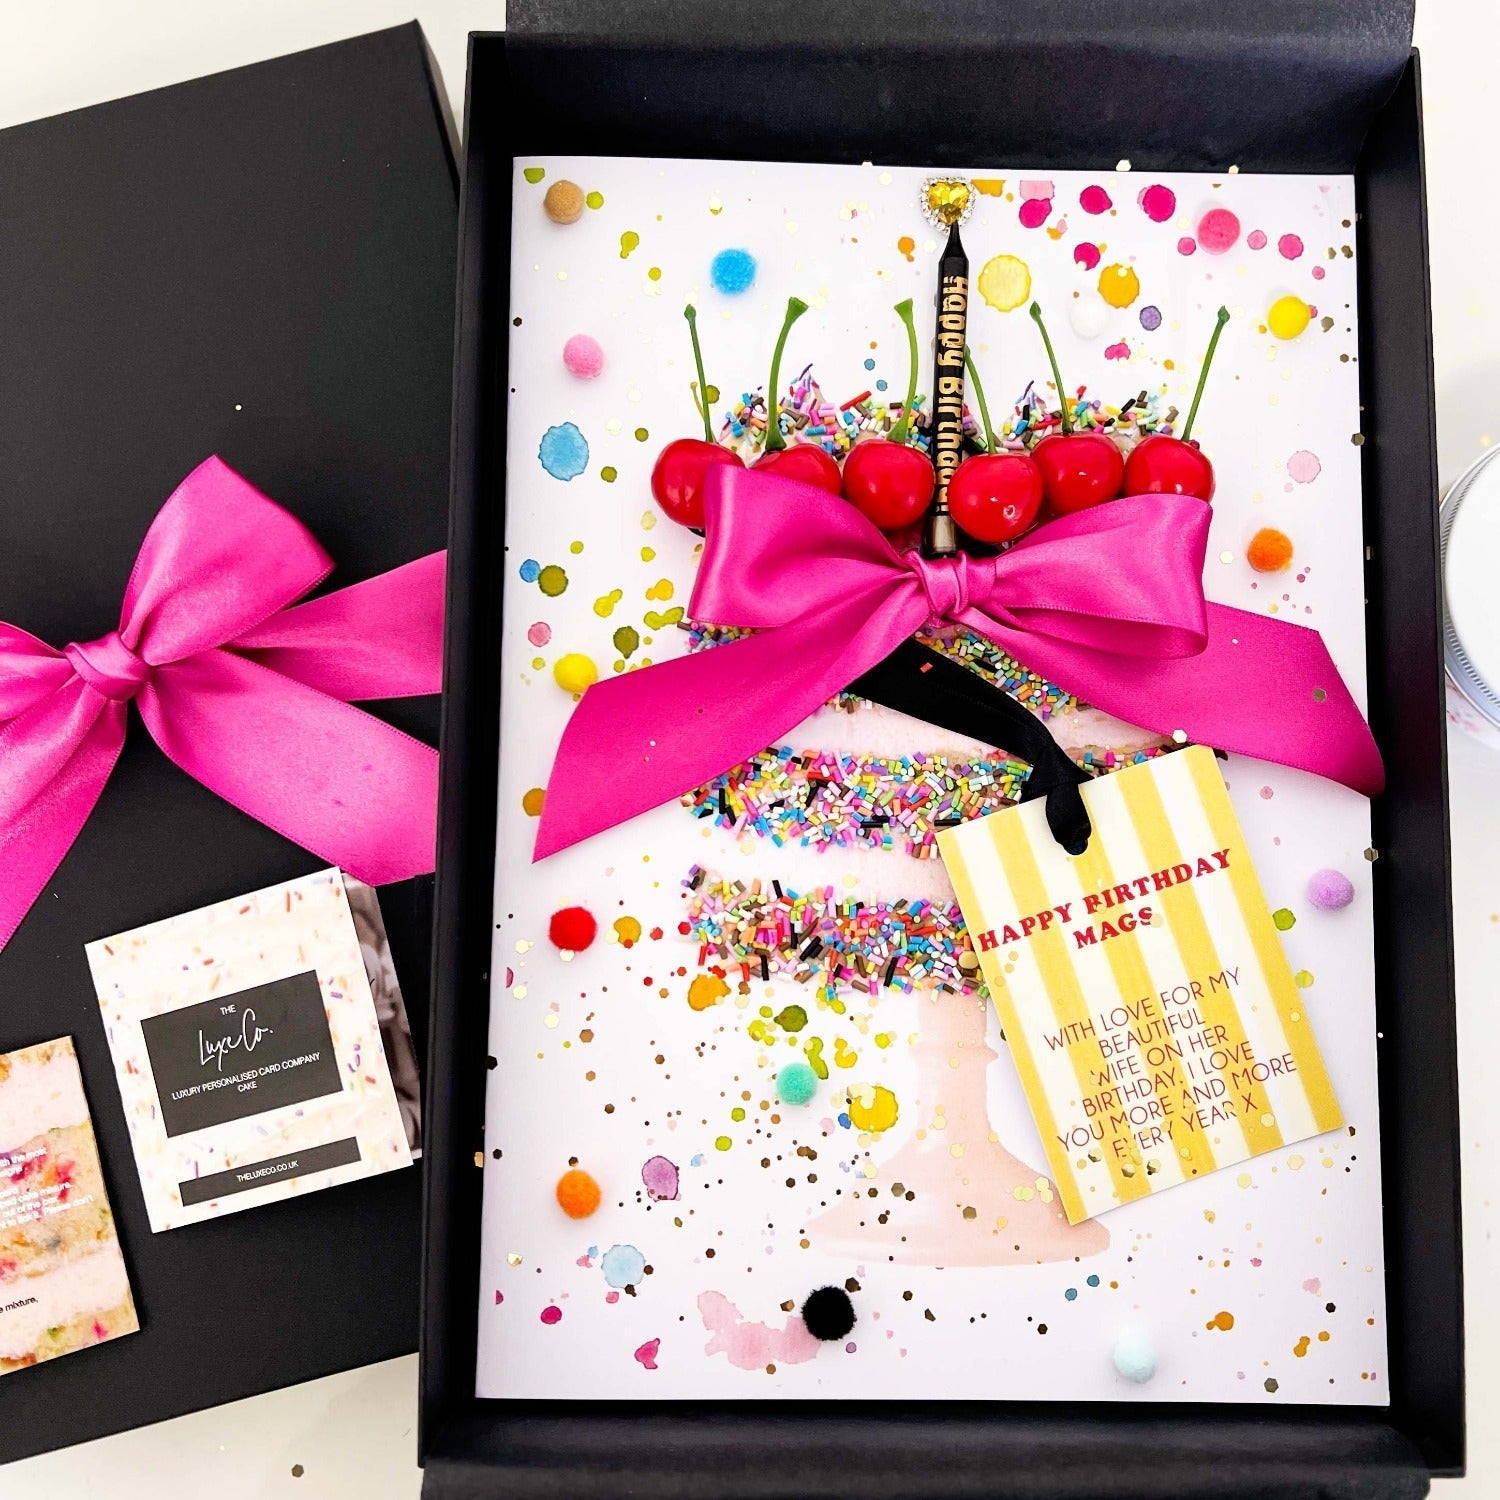 Luxury cake sister birthday card | Scented birthday cake cards by The Luxe Co